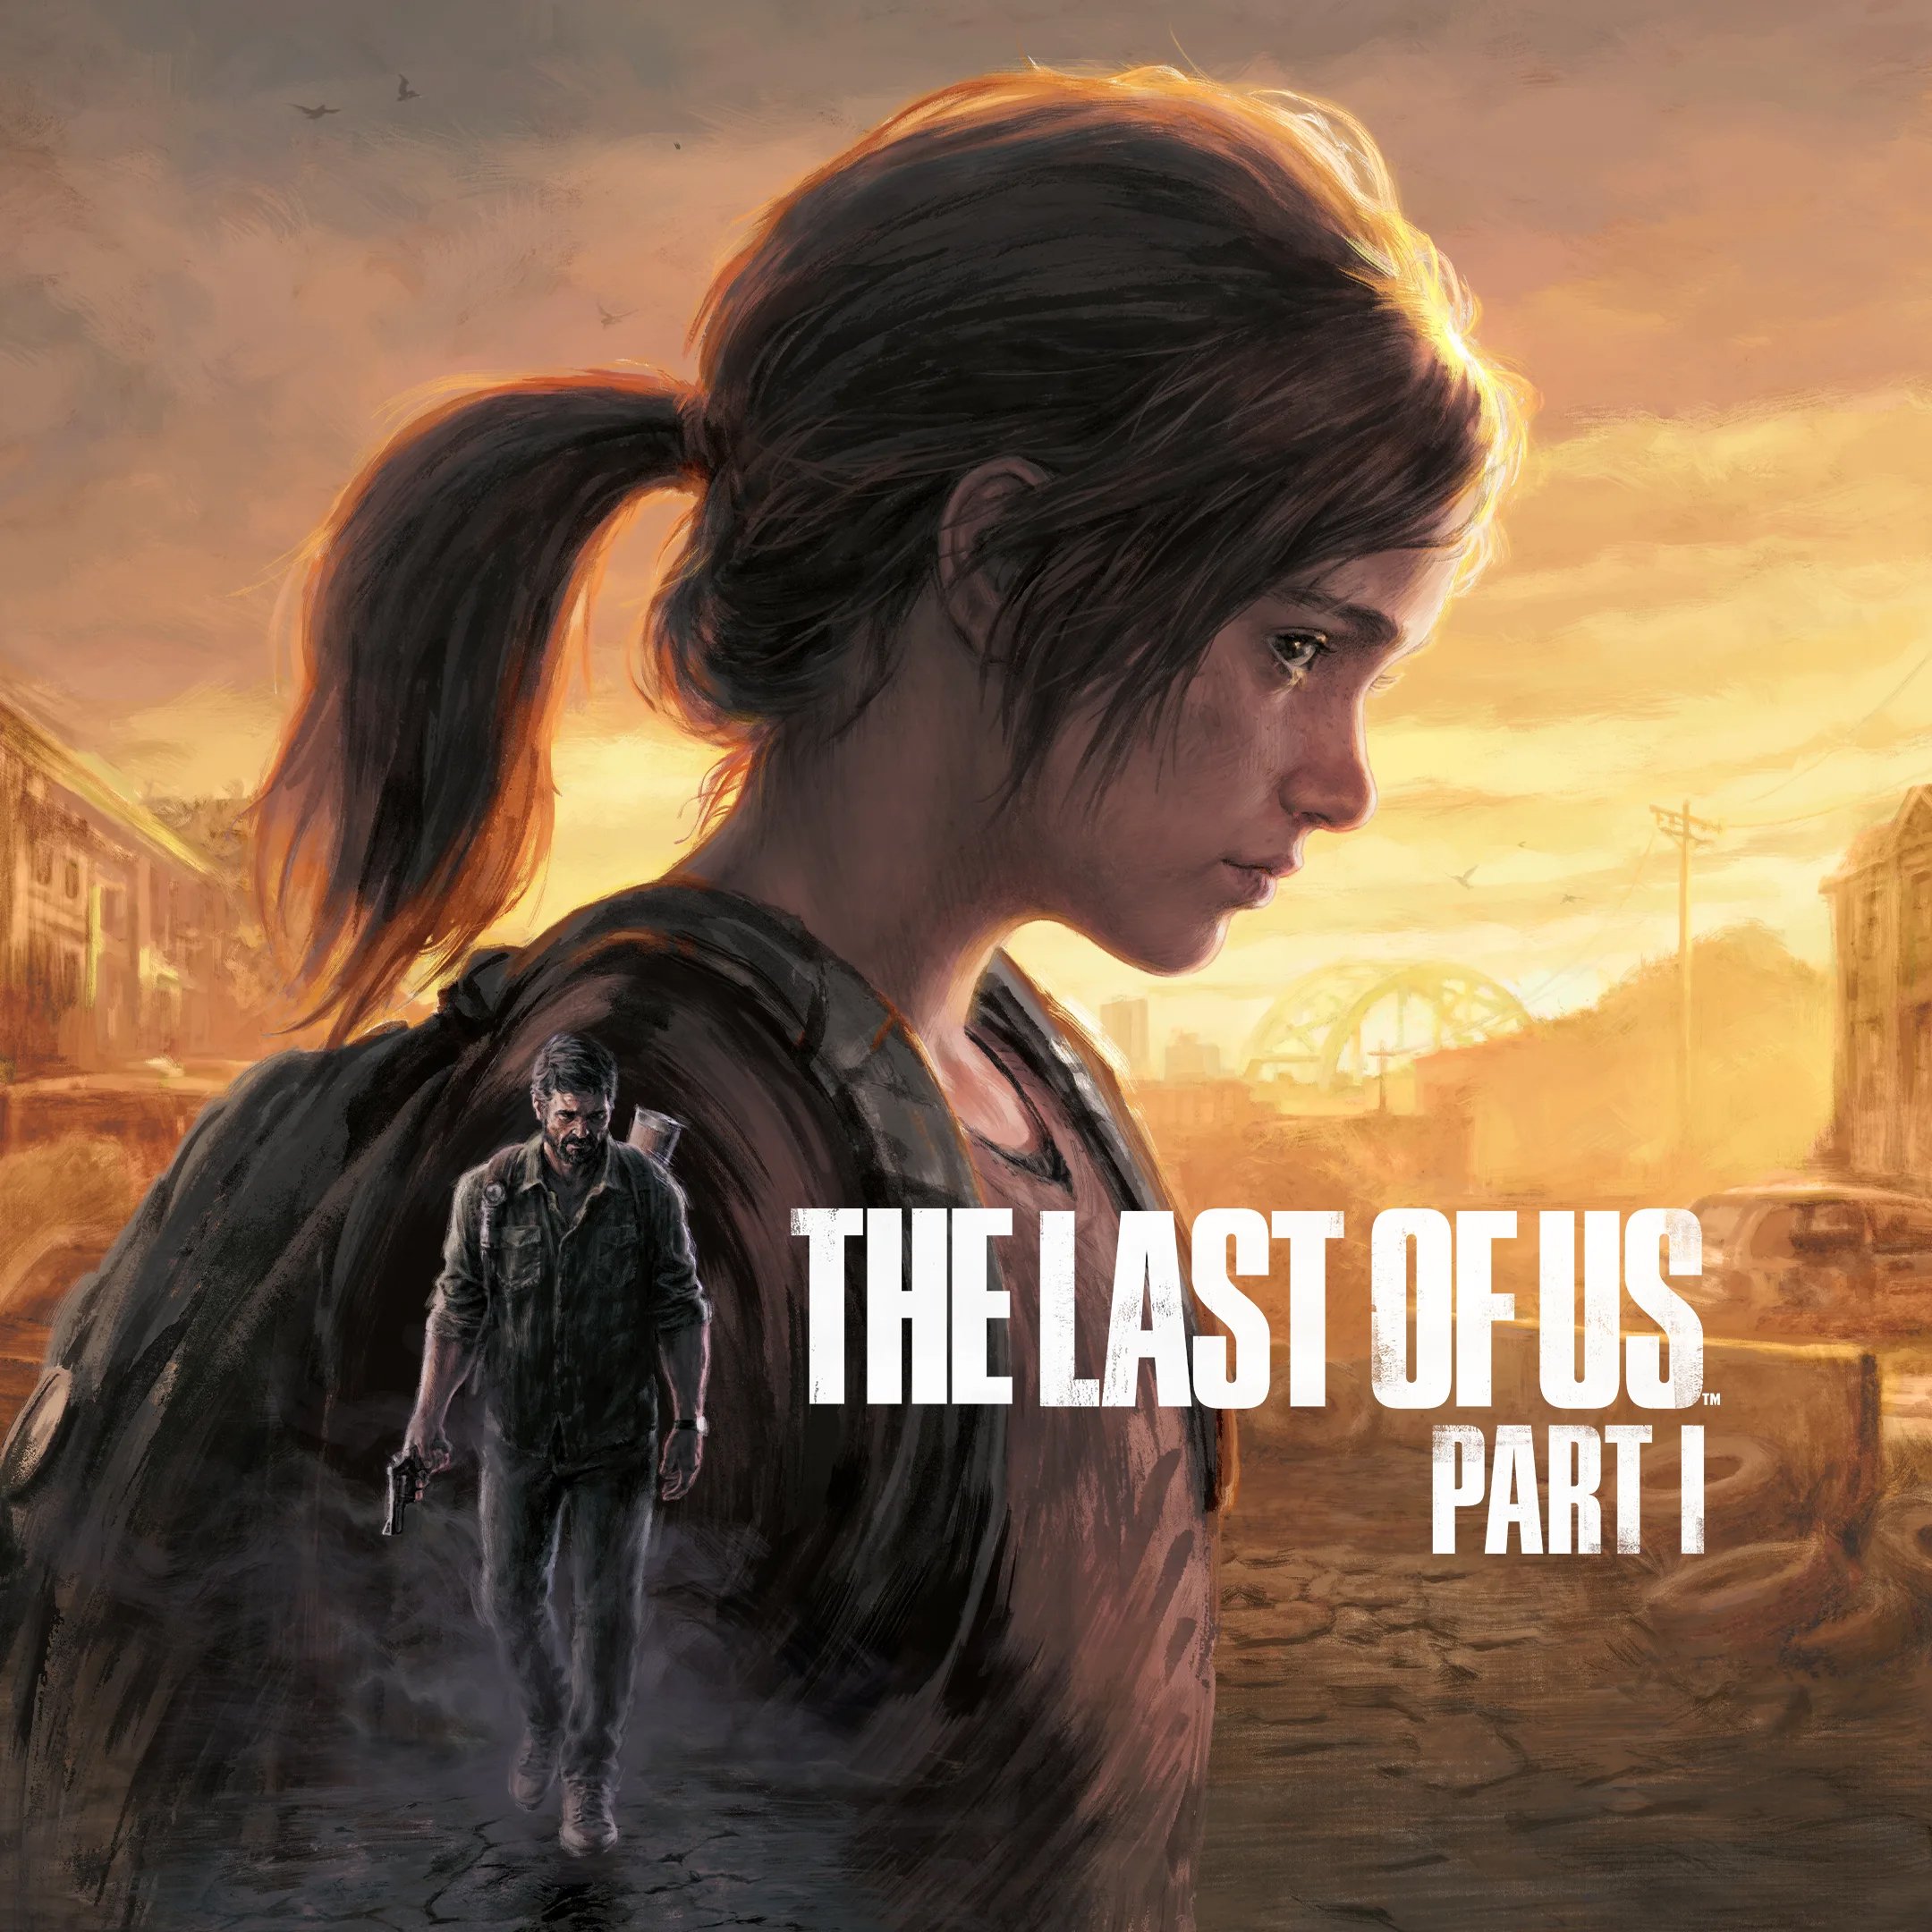  The Last of Us Part I announced for PS5, PC